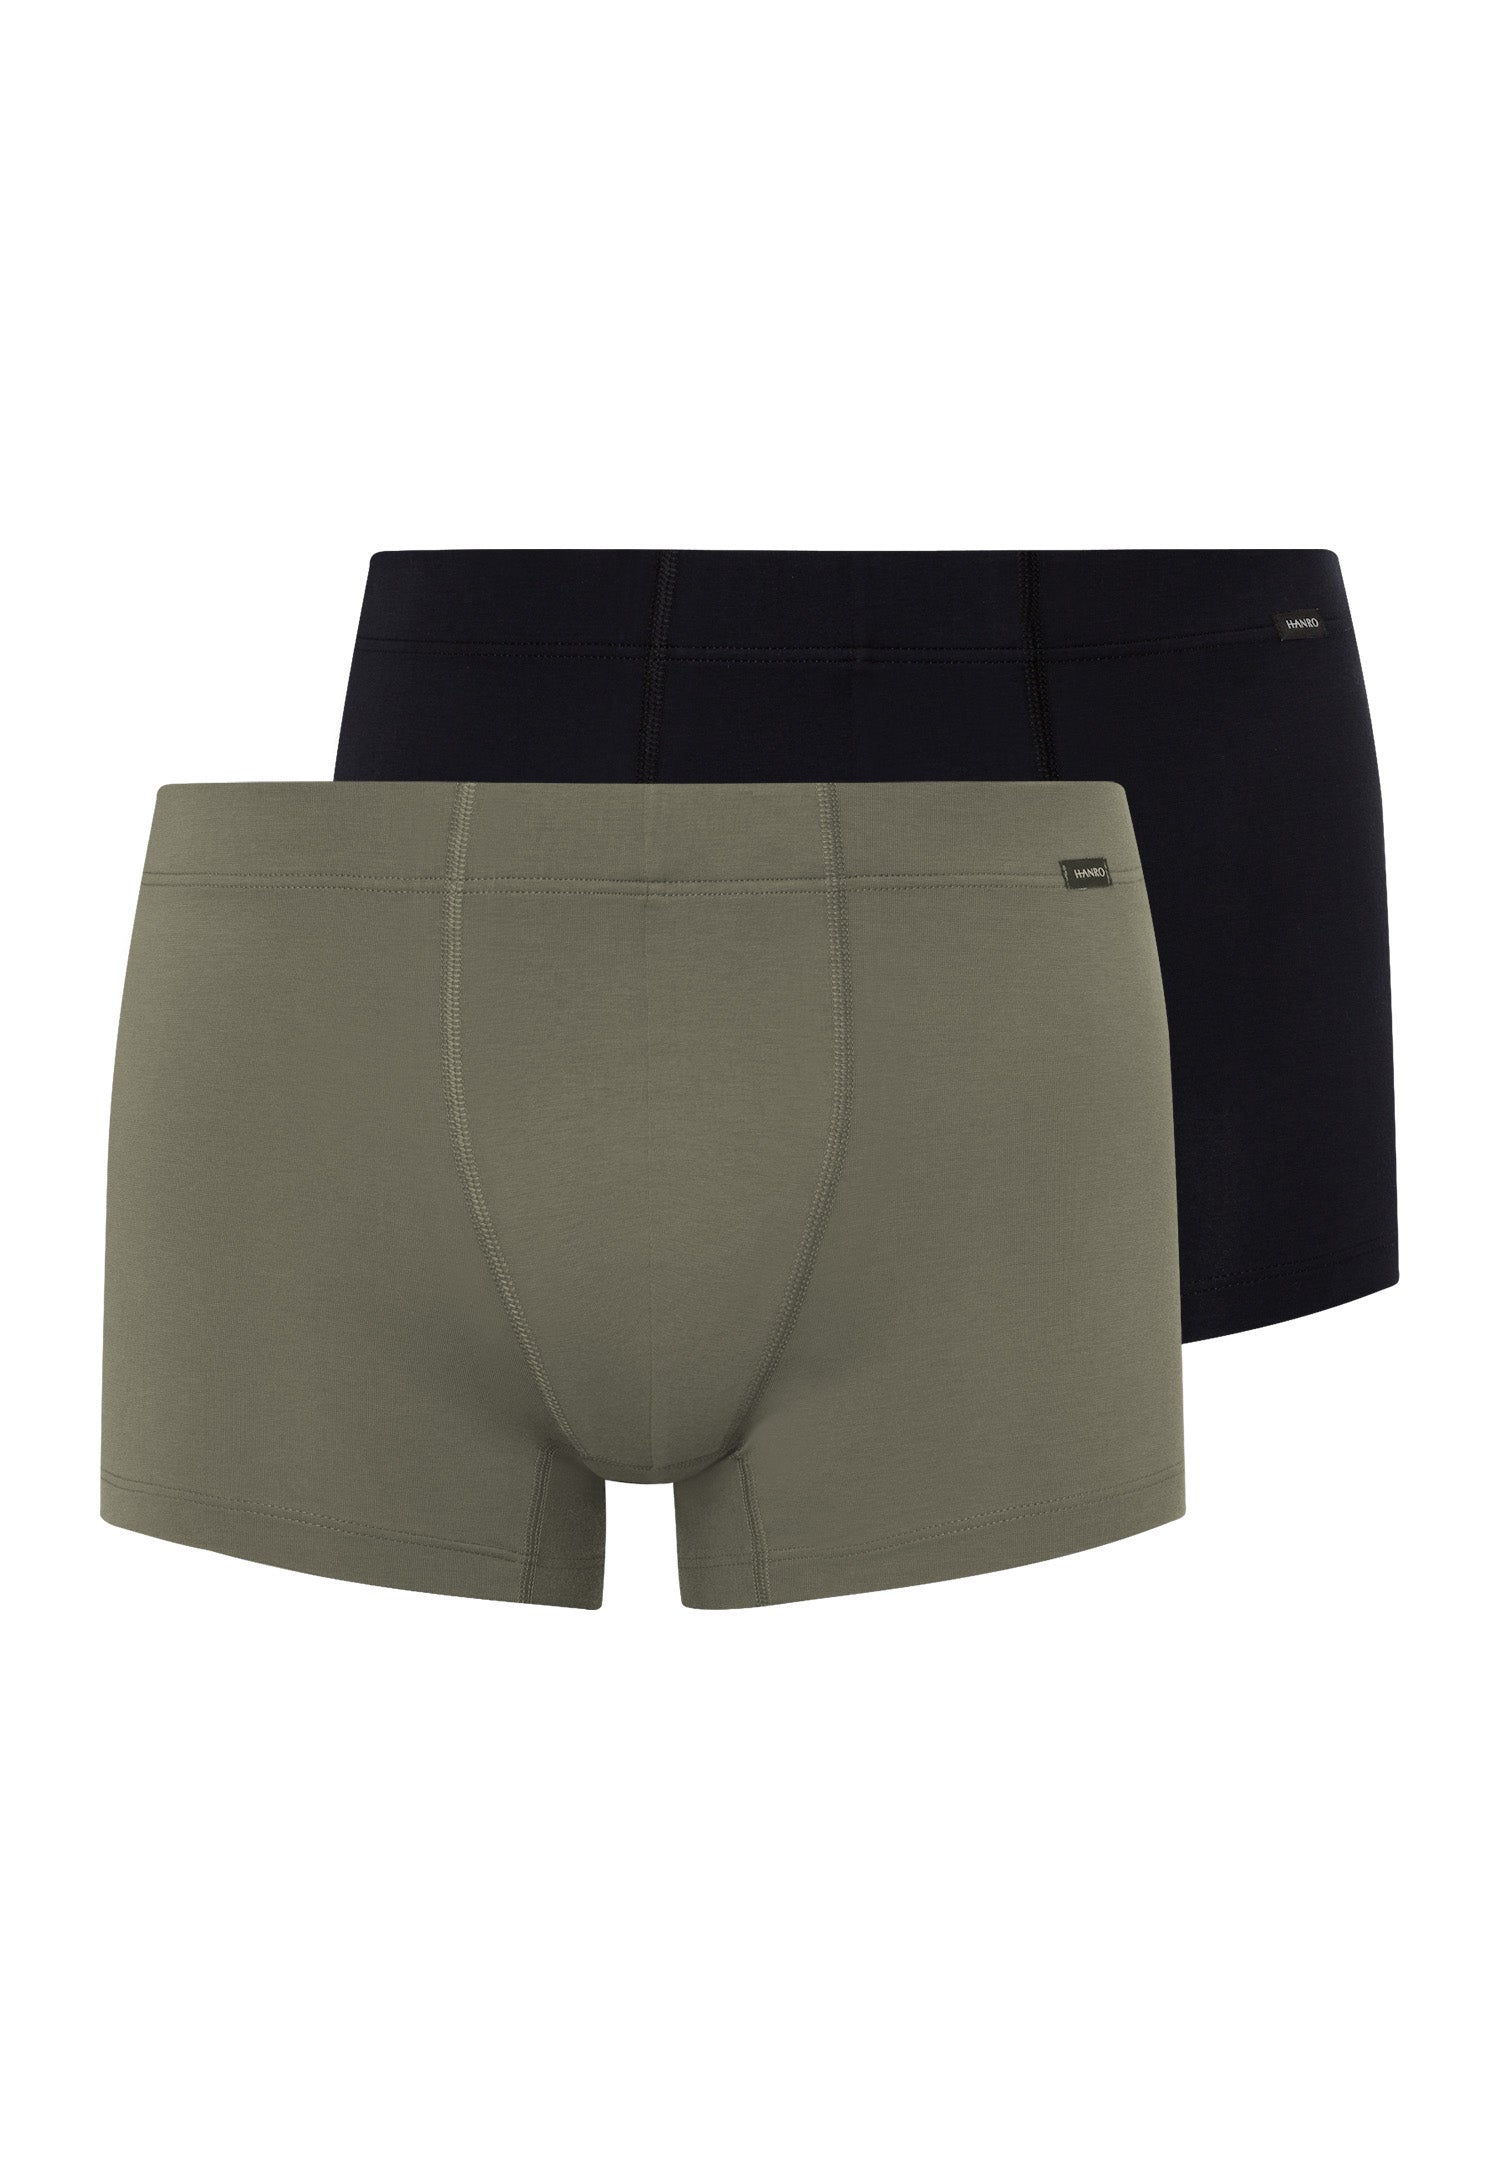 73079 Cotton Essentials 2 Pack Boxer Brief With Covered Waistband - 2156 Antique Green/Ebony